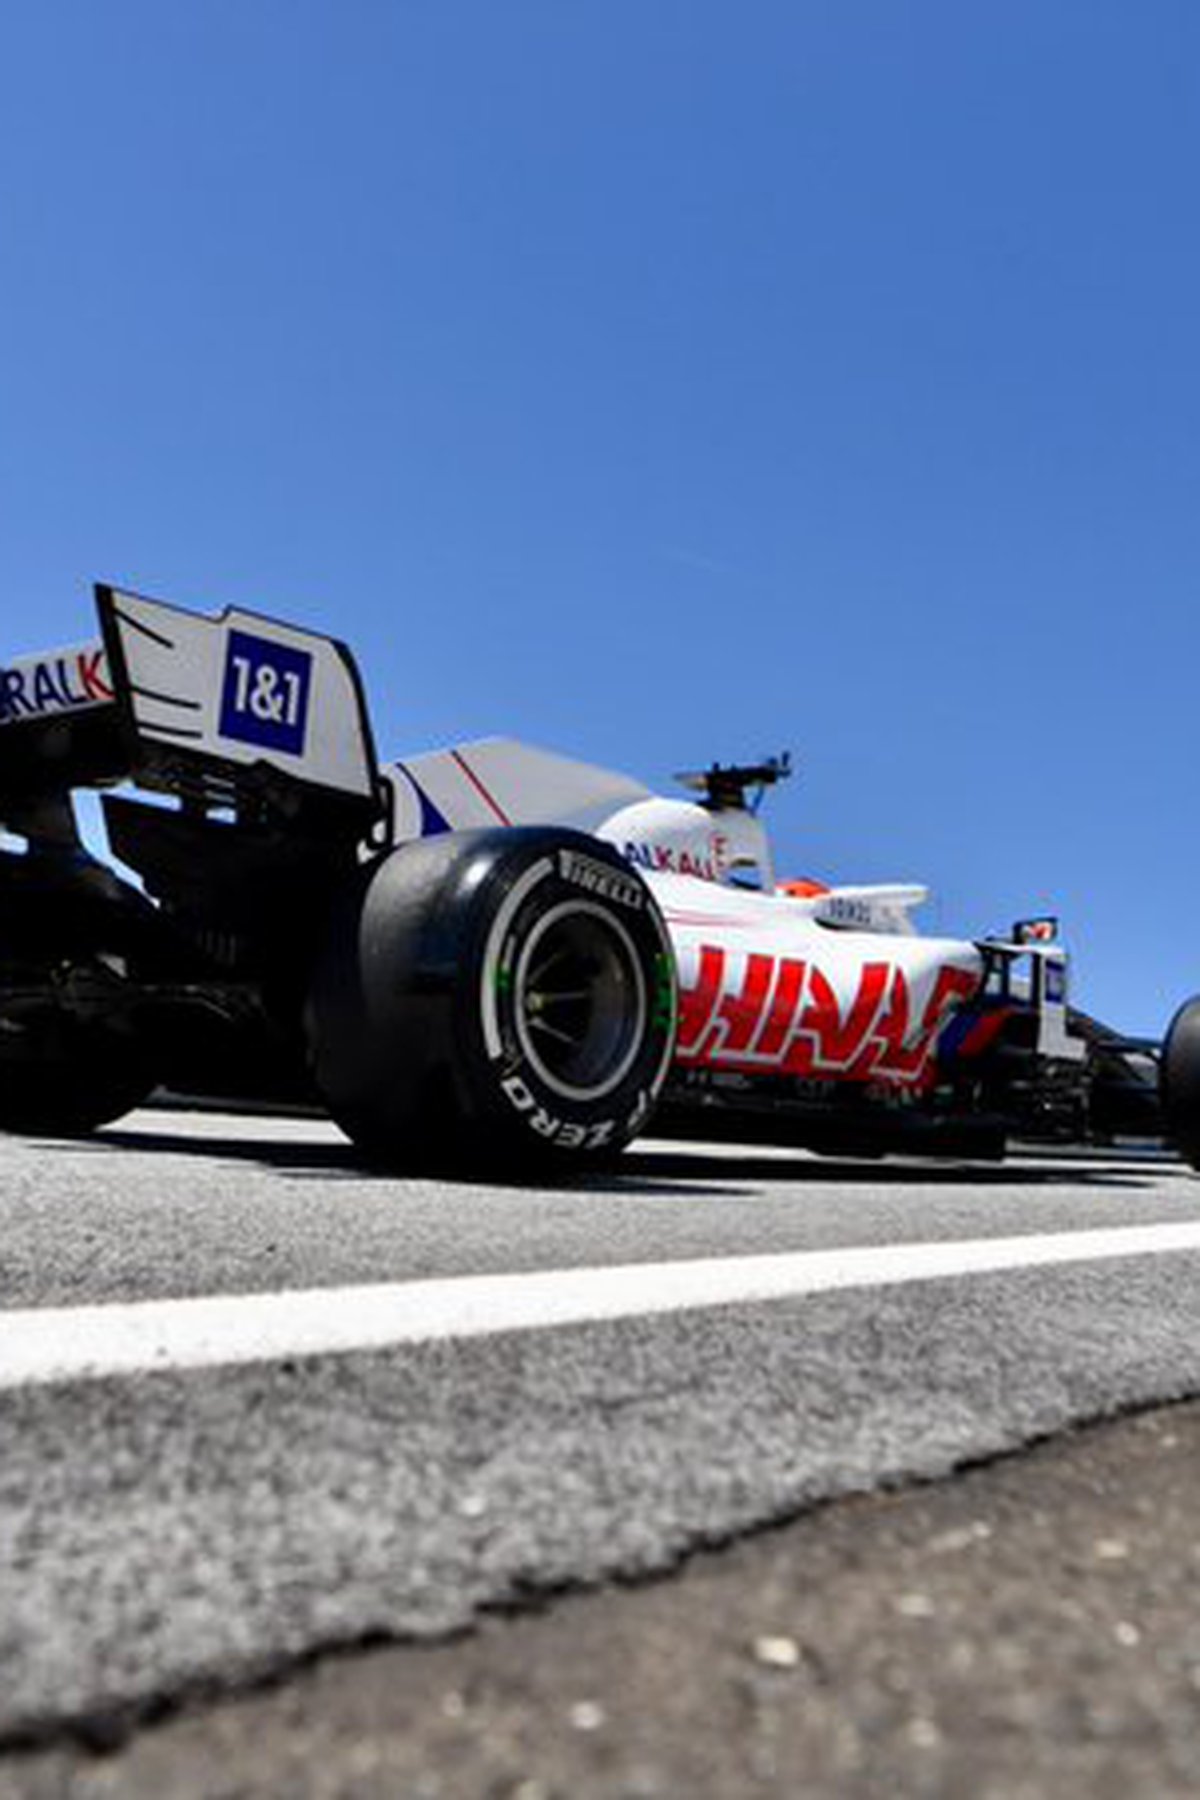 Interesting And Good Race” For Kannapolis Based Haas F1 Team